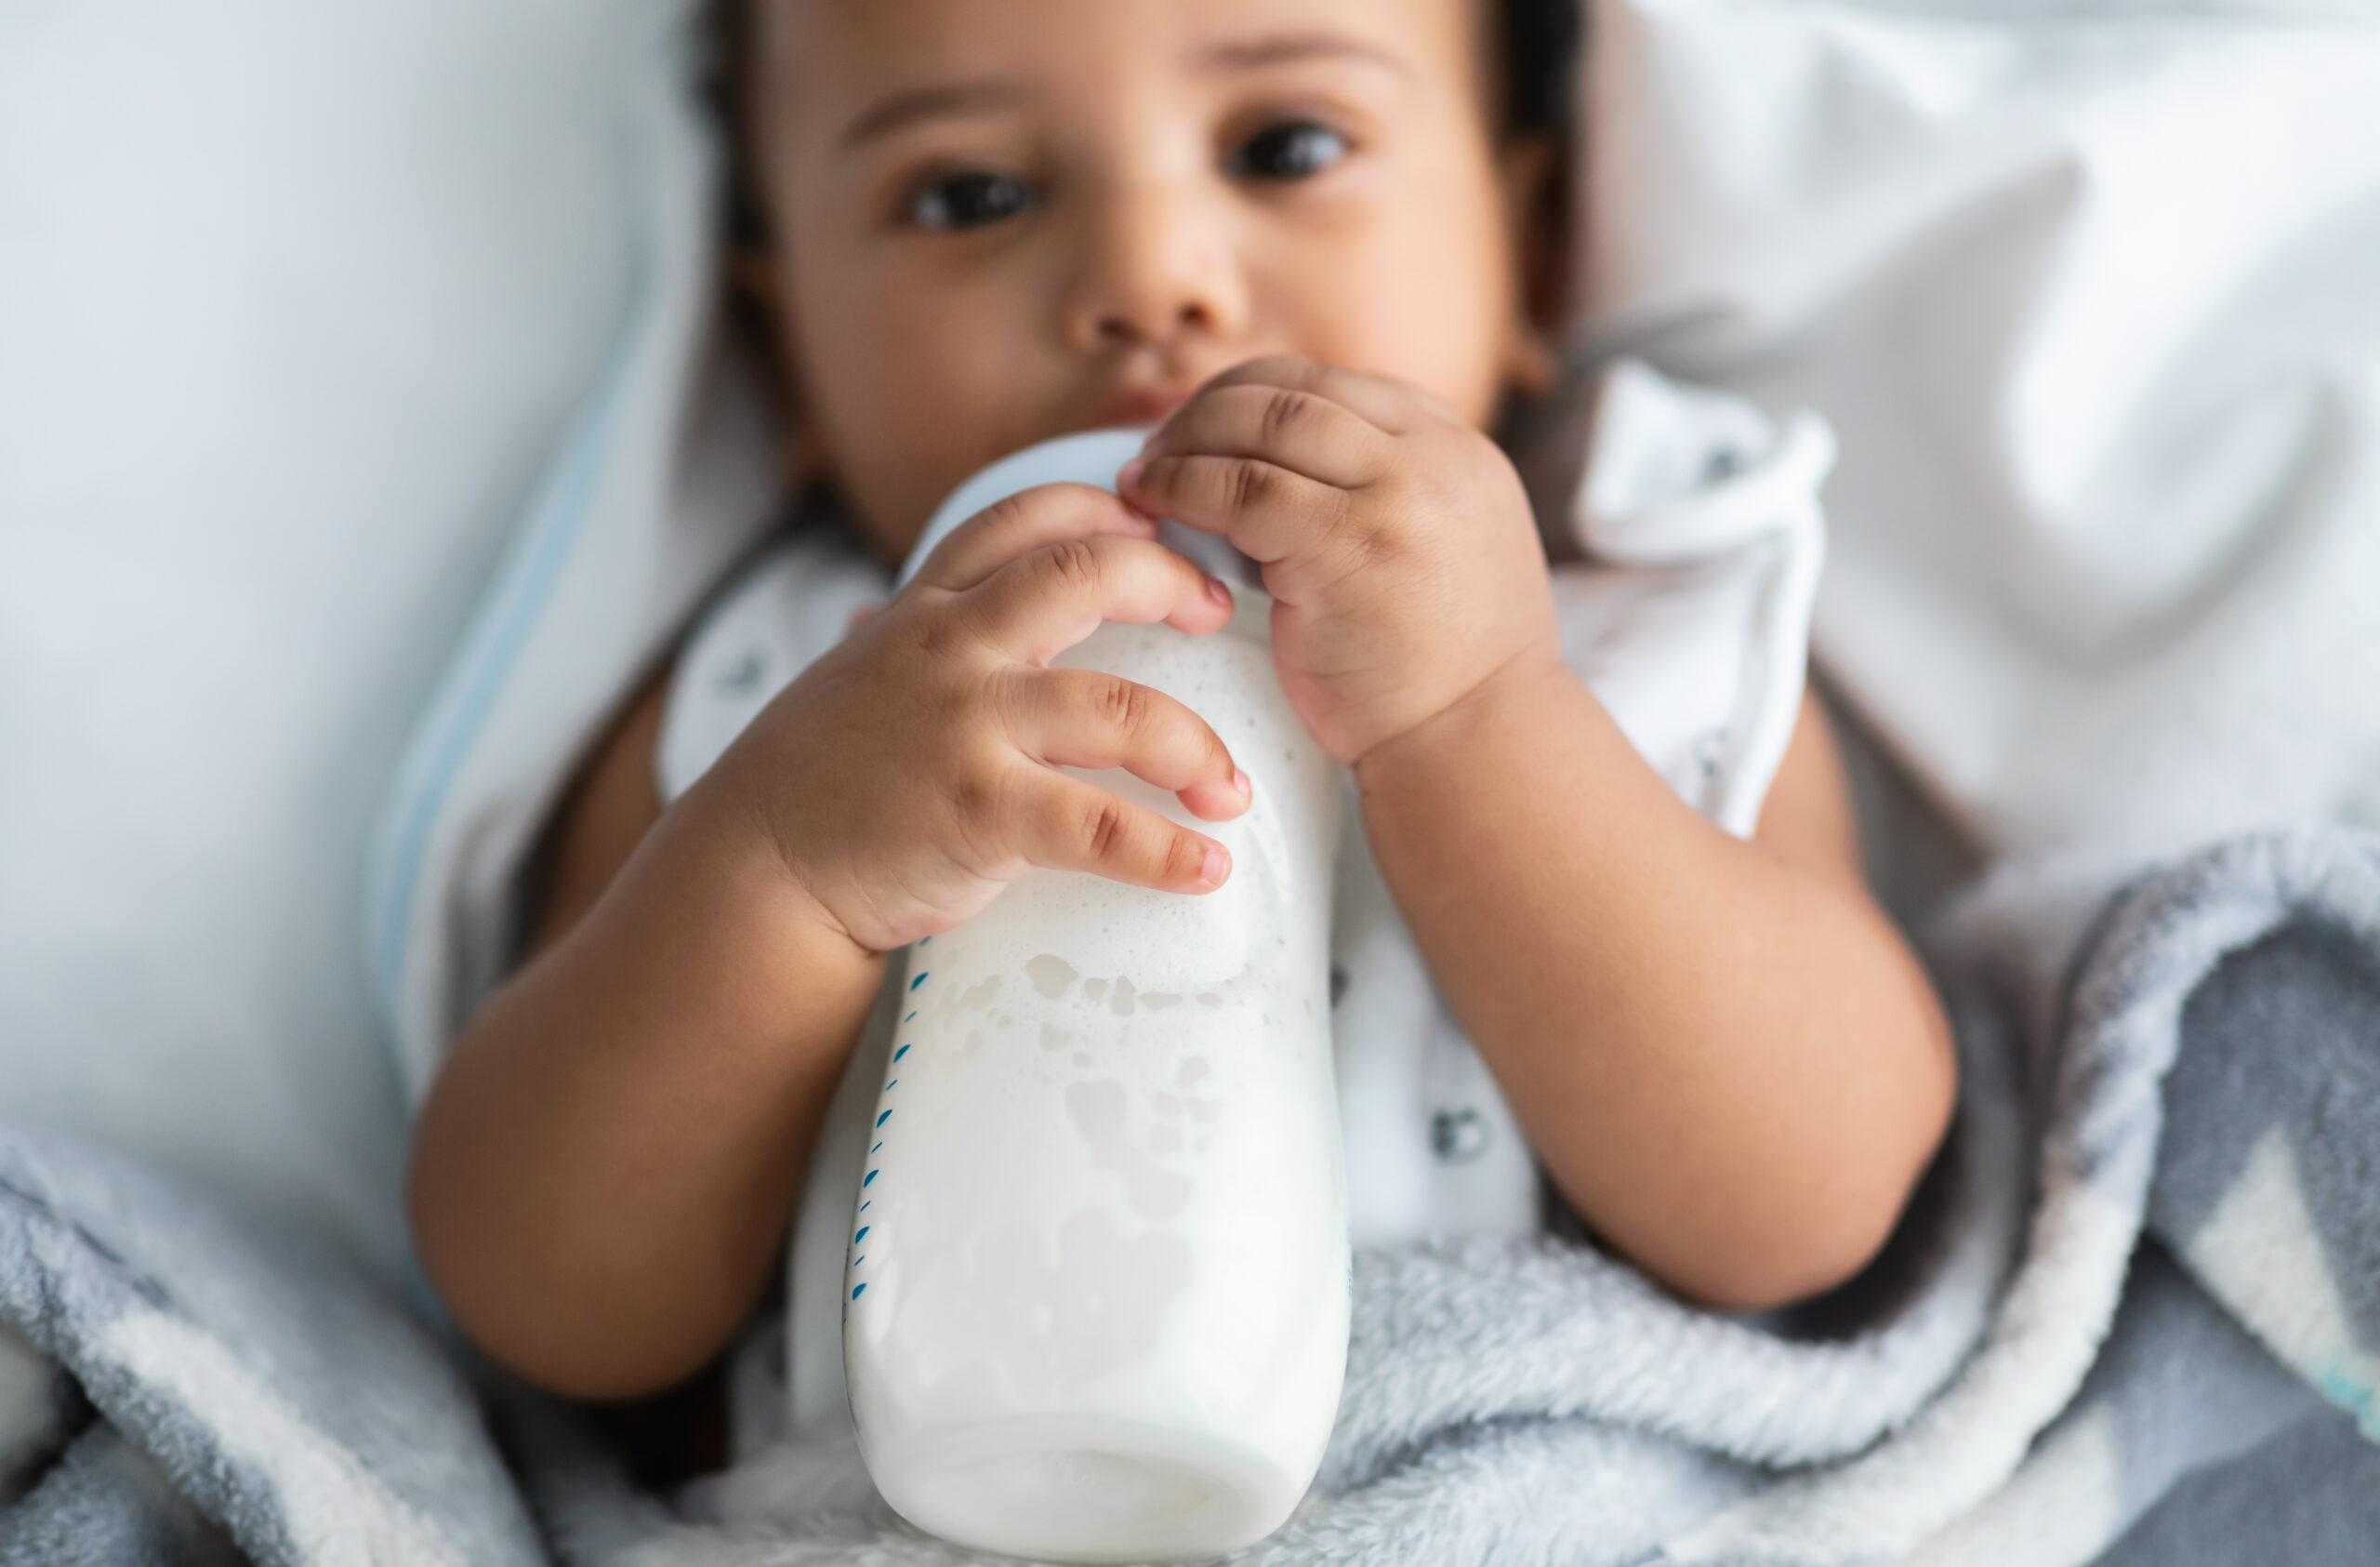 Cell-based breast milk